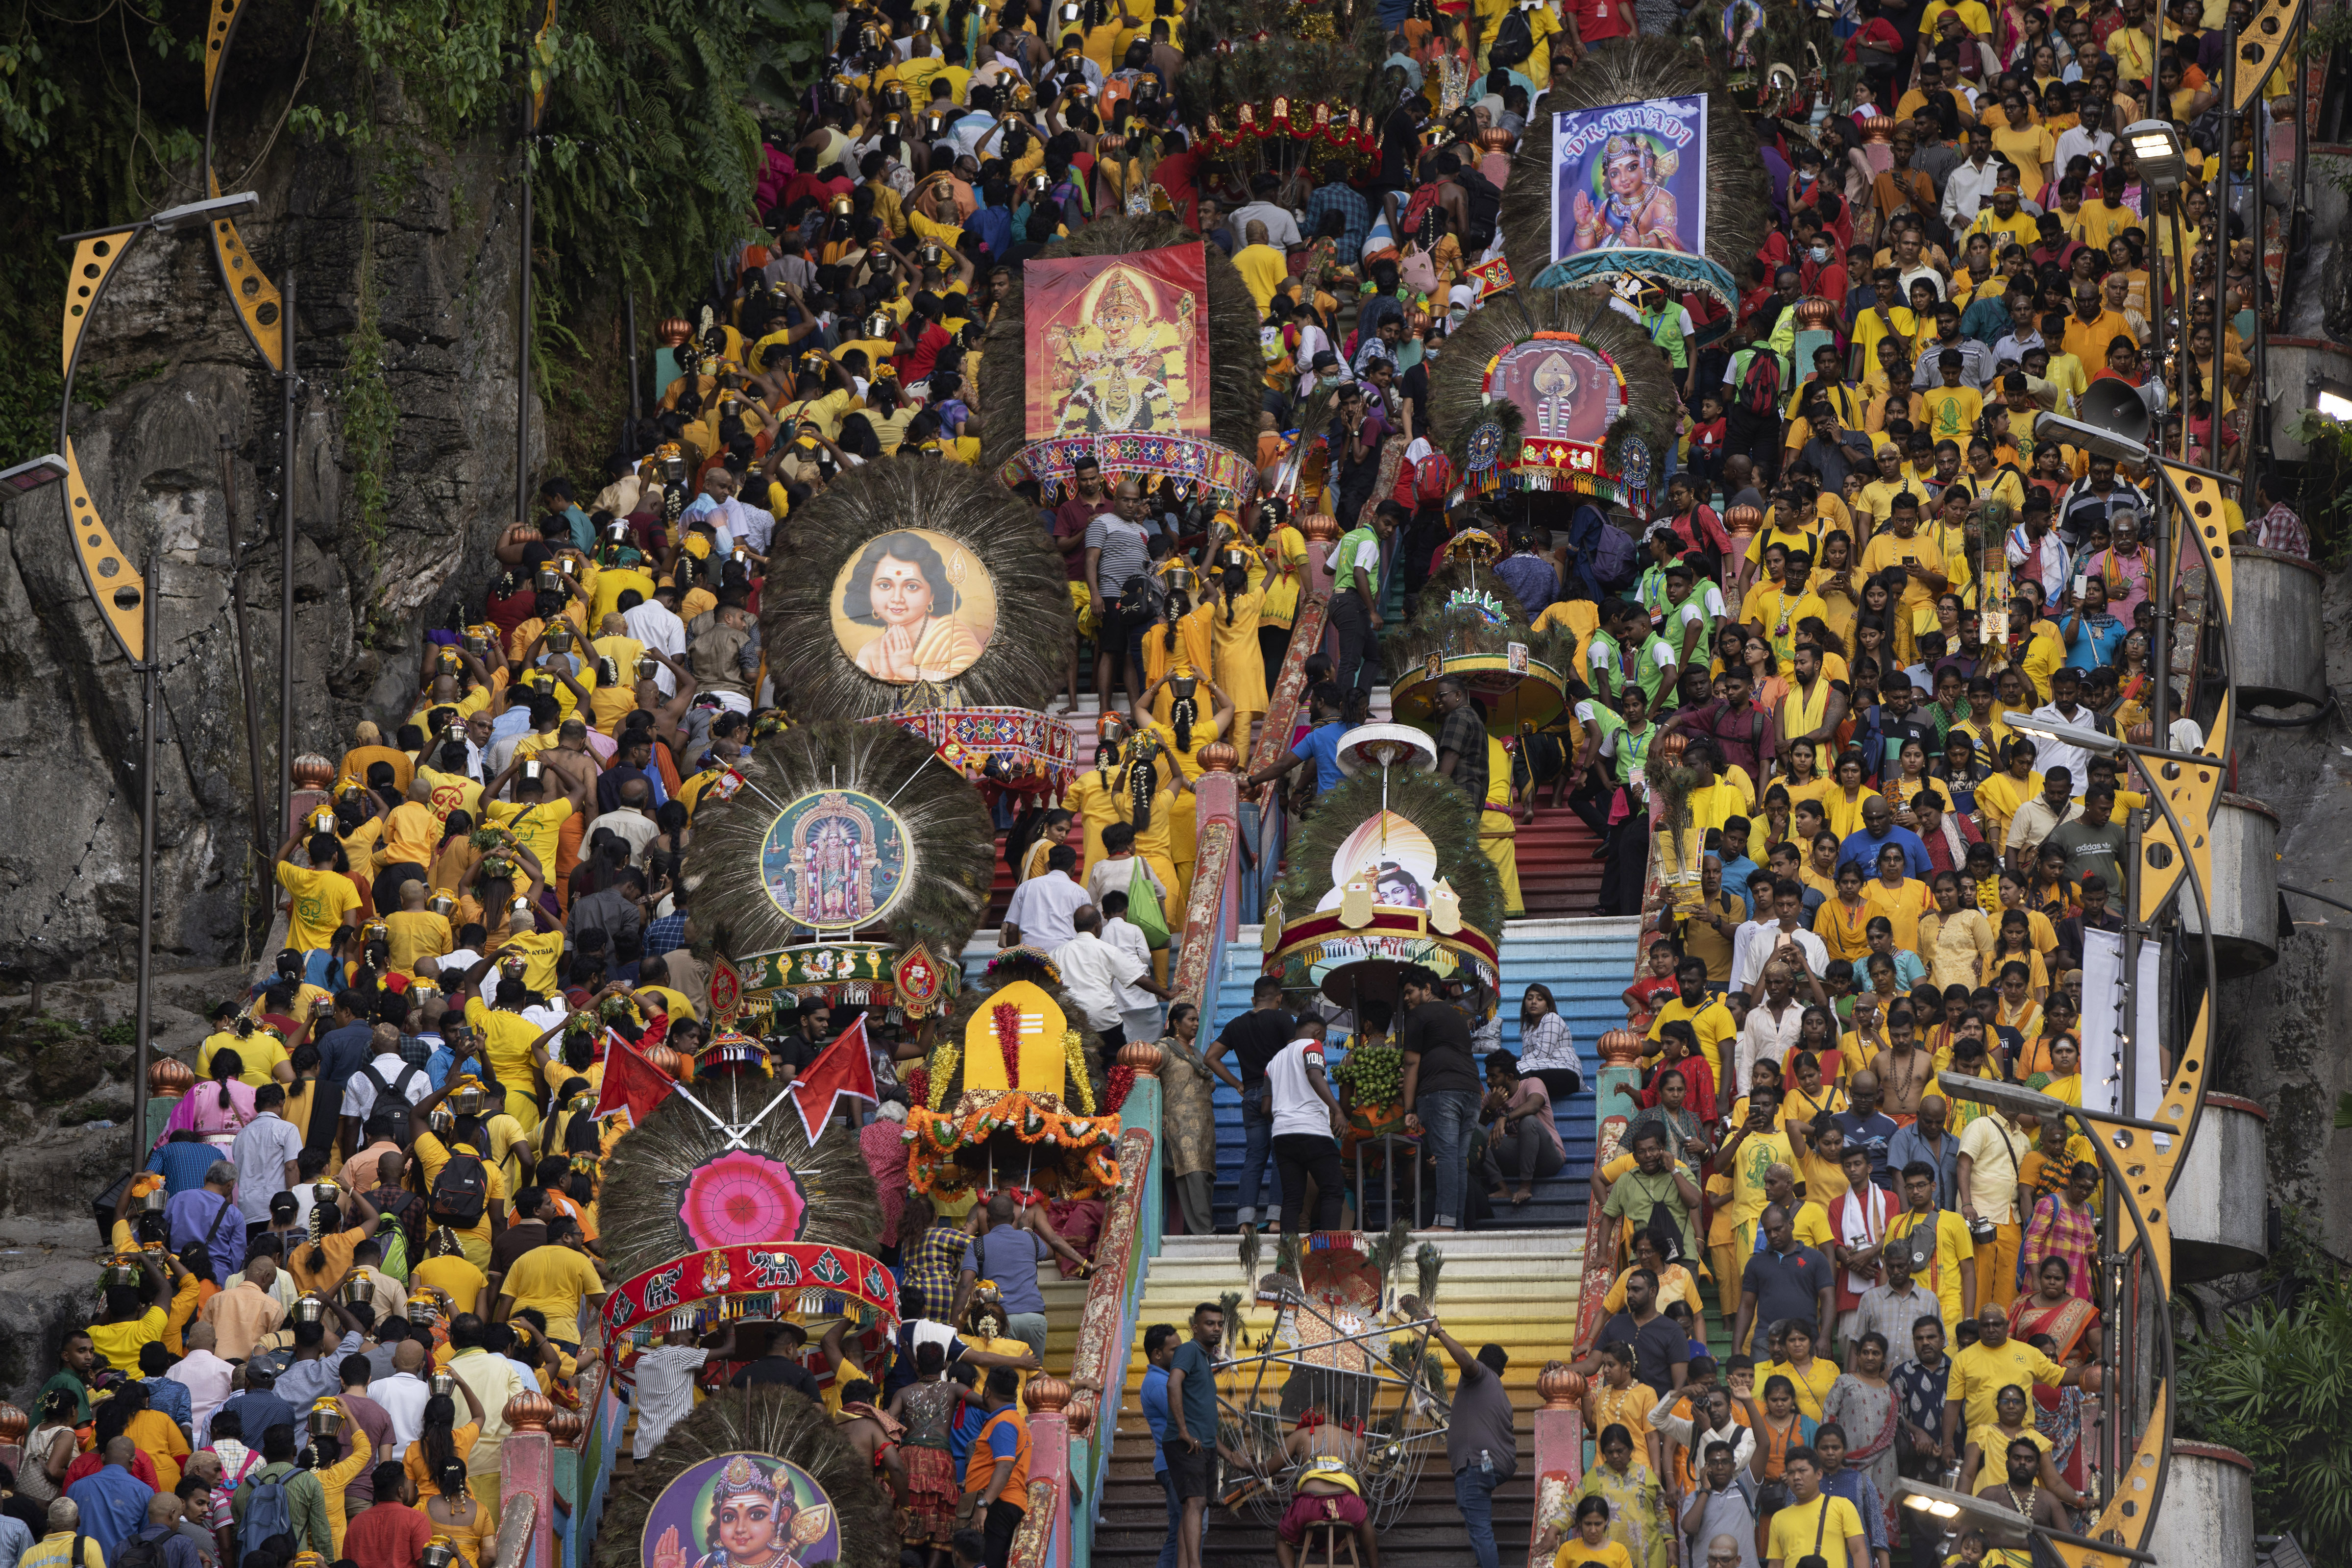 Giant Kavadi offering cages are carried by Hindu devotees in a procession during the Thaipusam festival at Batu Caves, outskirts of Kuala Lumpur, Saturday, Feb. 8, 2020. Thaipusam, which is celebrated in honor of Hindu god Lord Murugan, is an annual procession by Hindu devotees seeking blessings, fulfilling vows and offering thanks. (AP Photo/Vincent Thian)